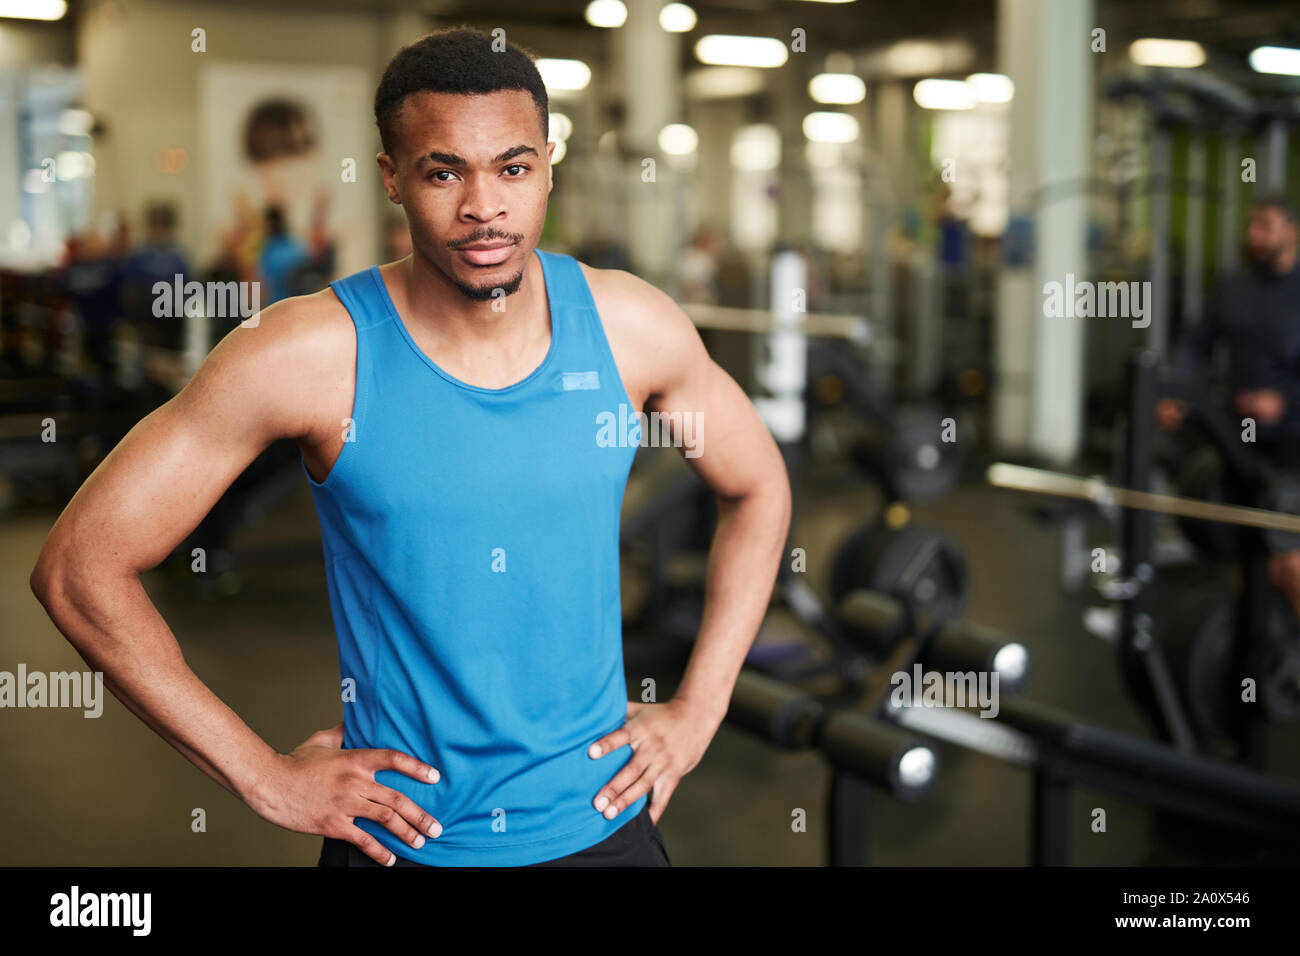 Waist up portrait of muscular fitness coach looking at camera while posing confidently in modern gym, copy space Stock Photo